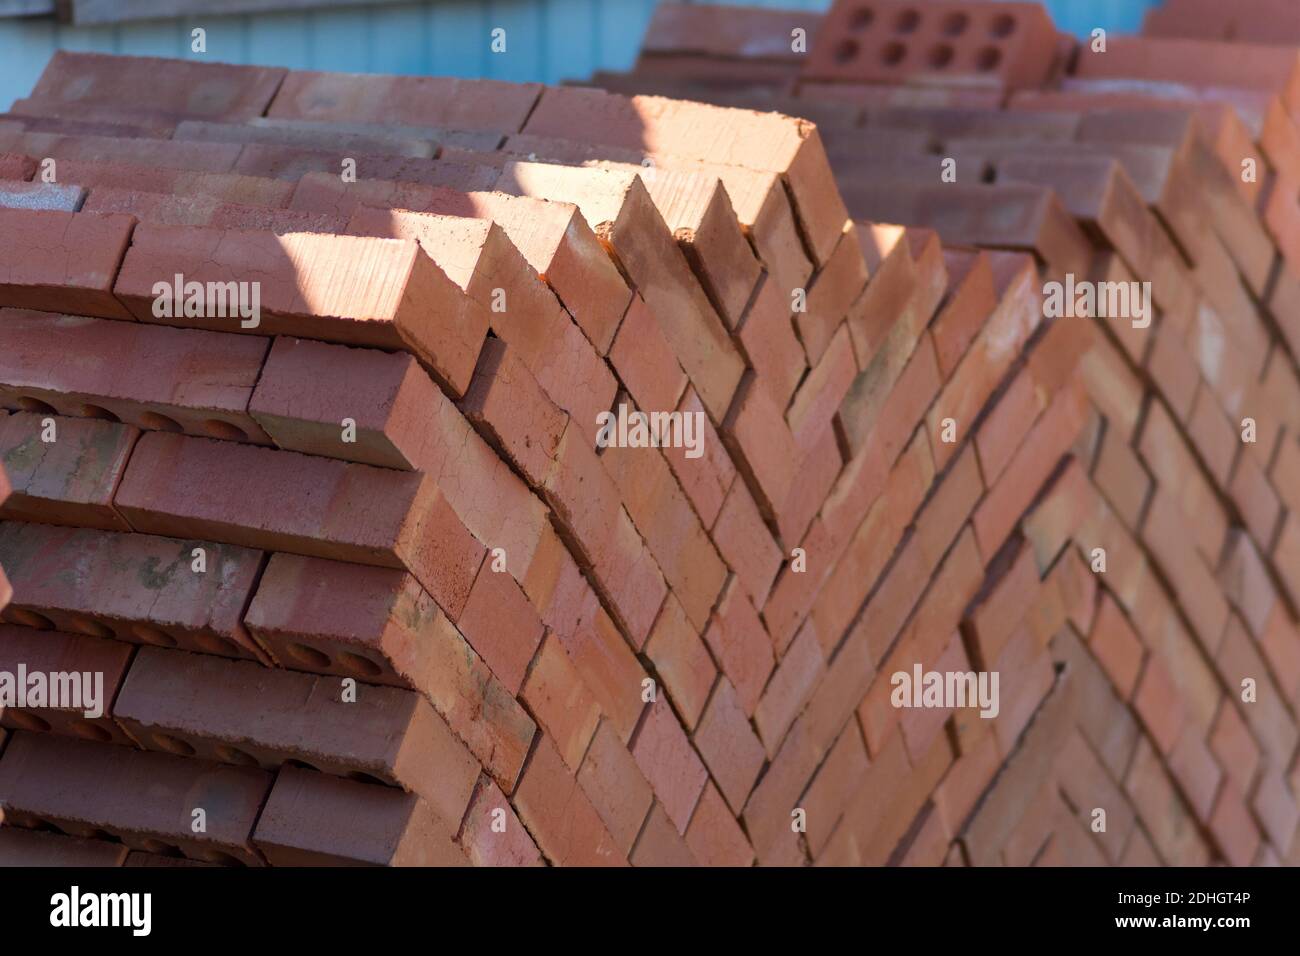 Building material - red brick folded on a pallet. Stock Photo